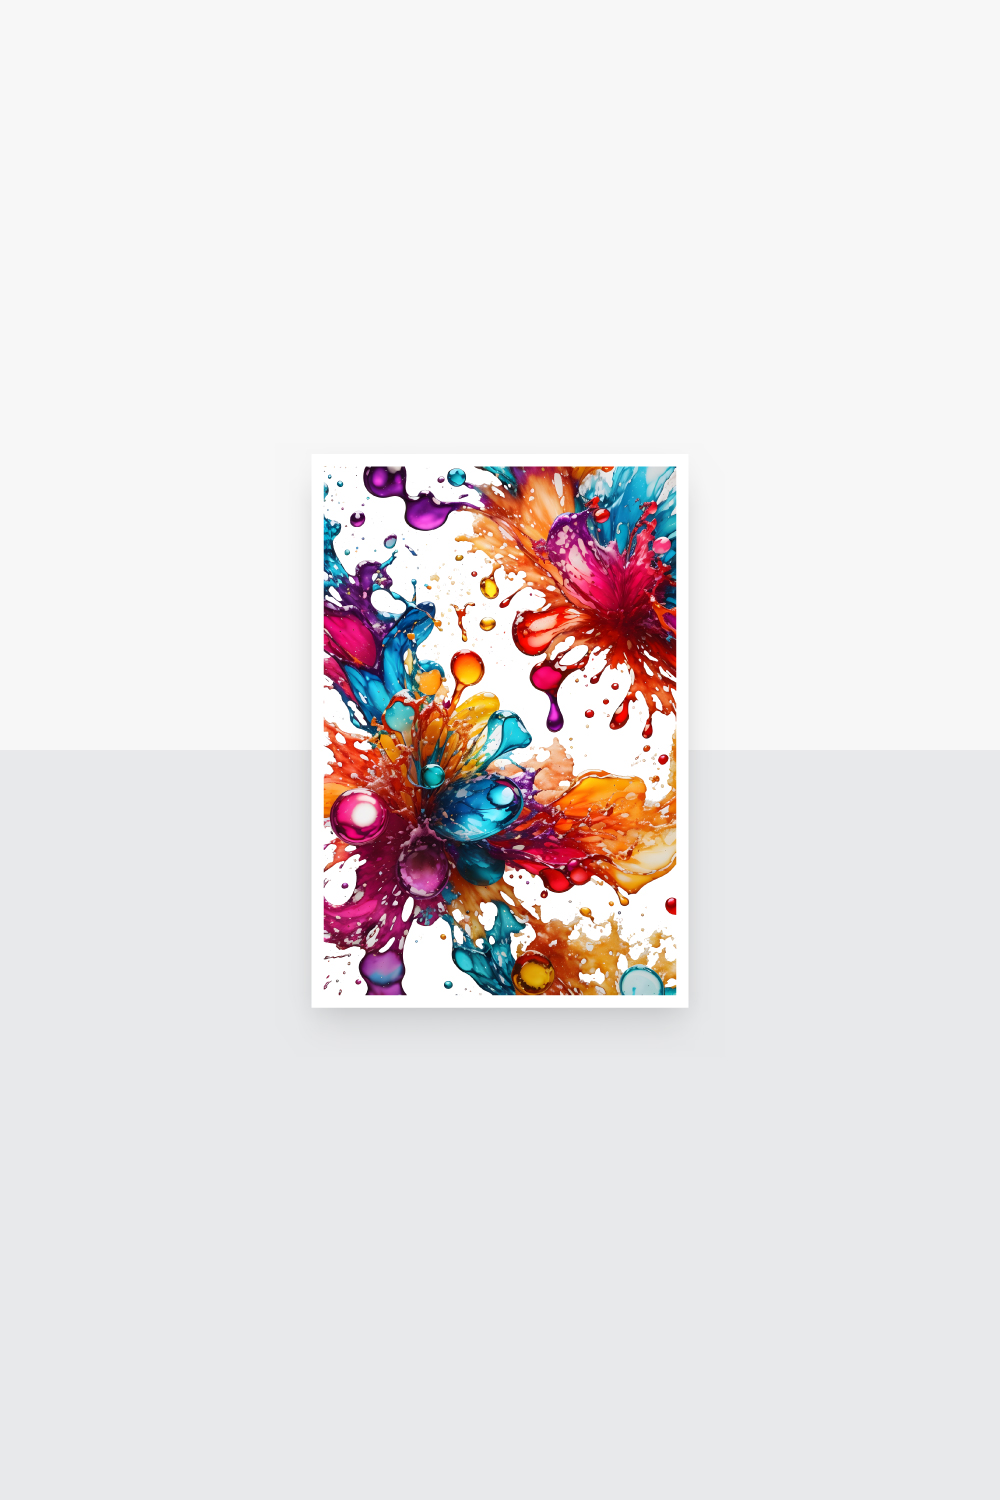 Abstract Colorful splash and stain textures pinterest preview image.